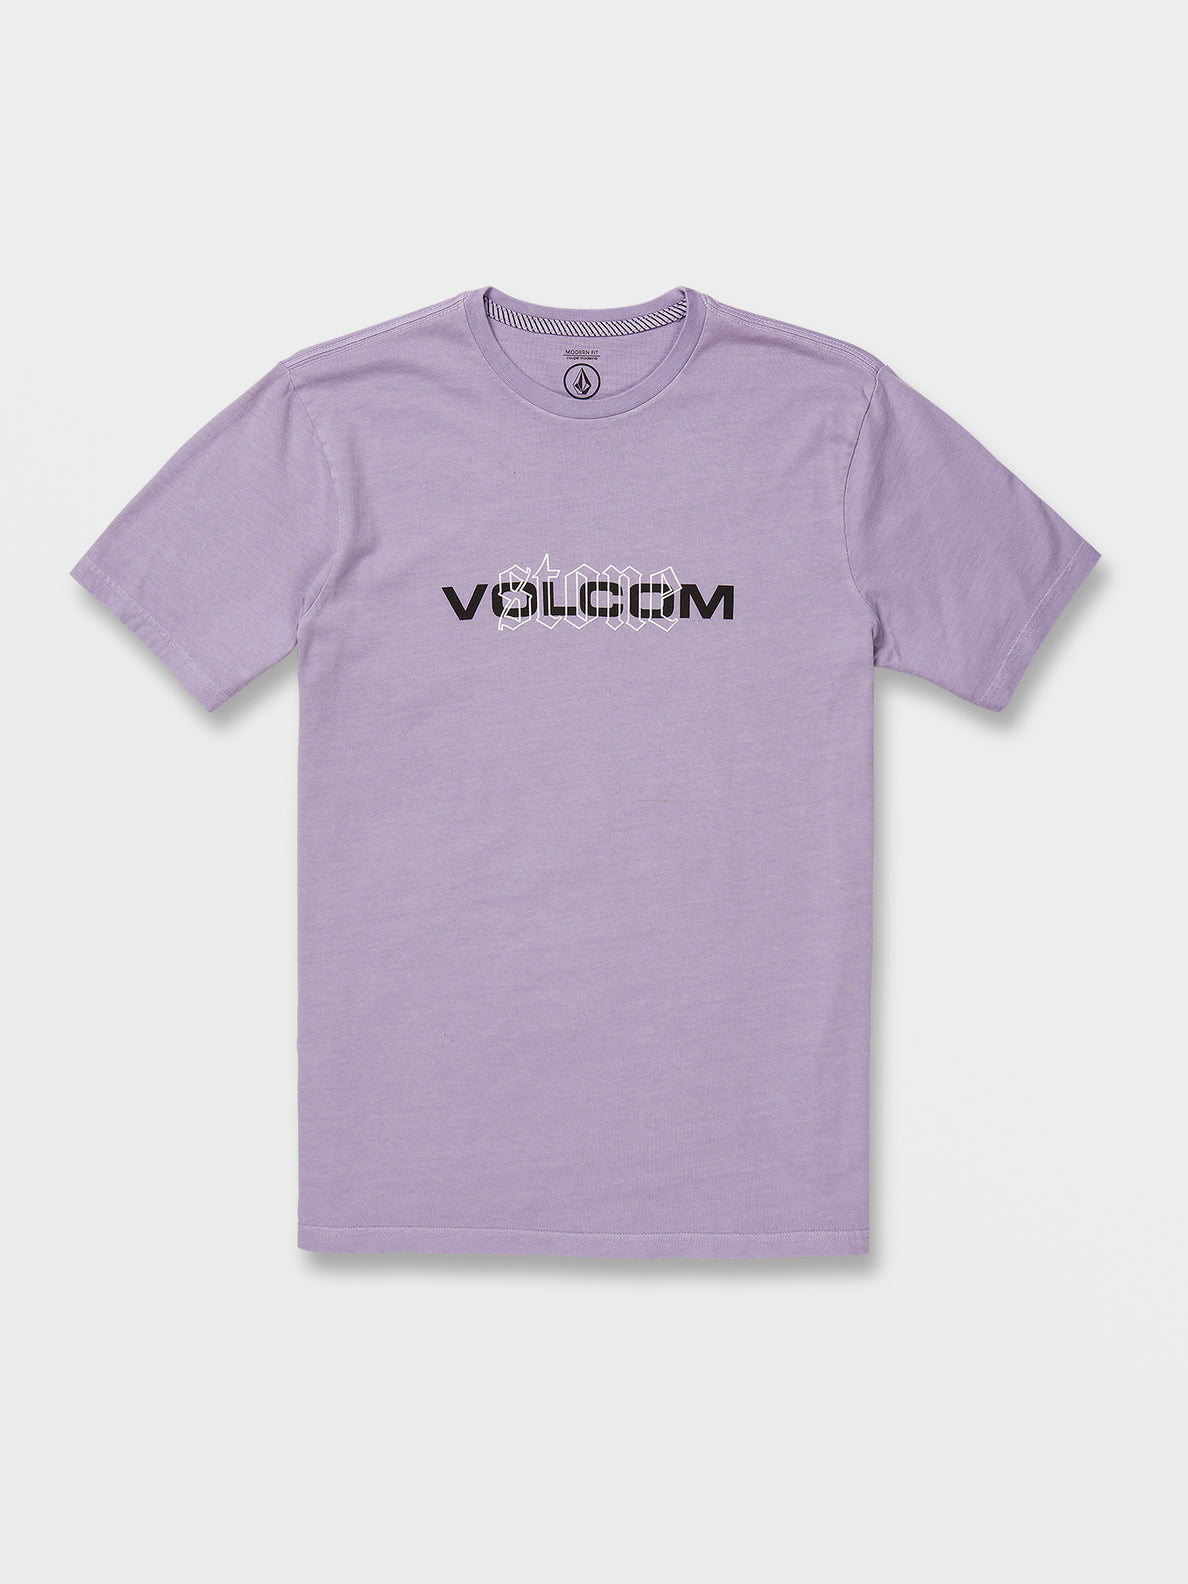 Cover Up Short Sleeve Tee - Violet Ice (A5242202_VIC) [1]